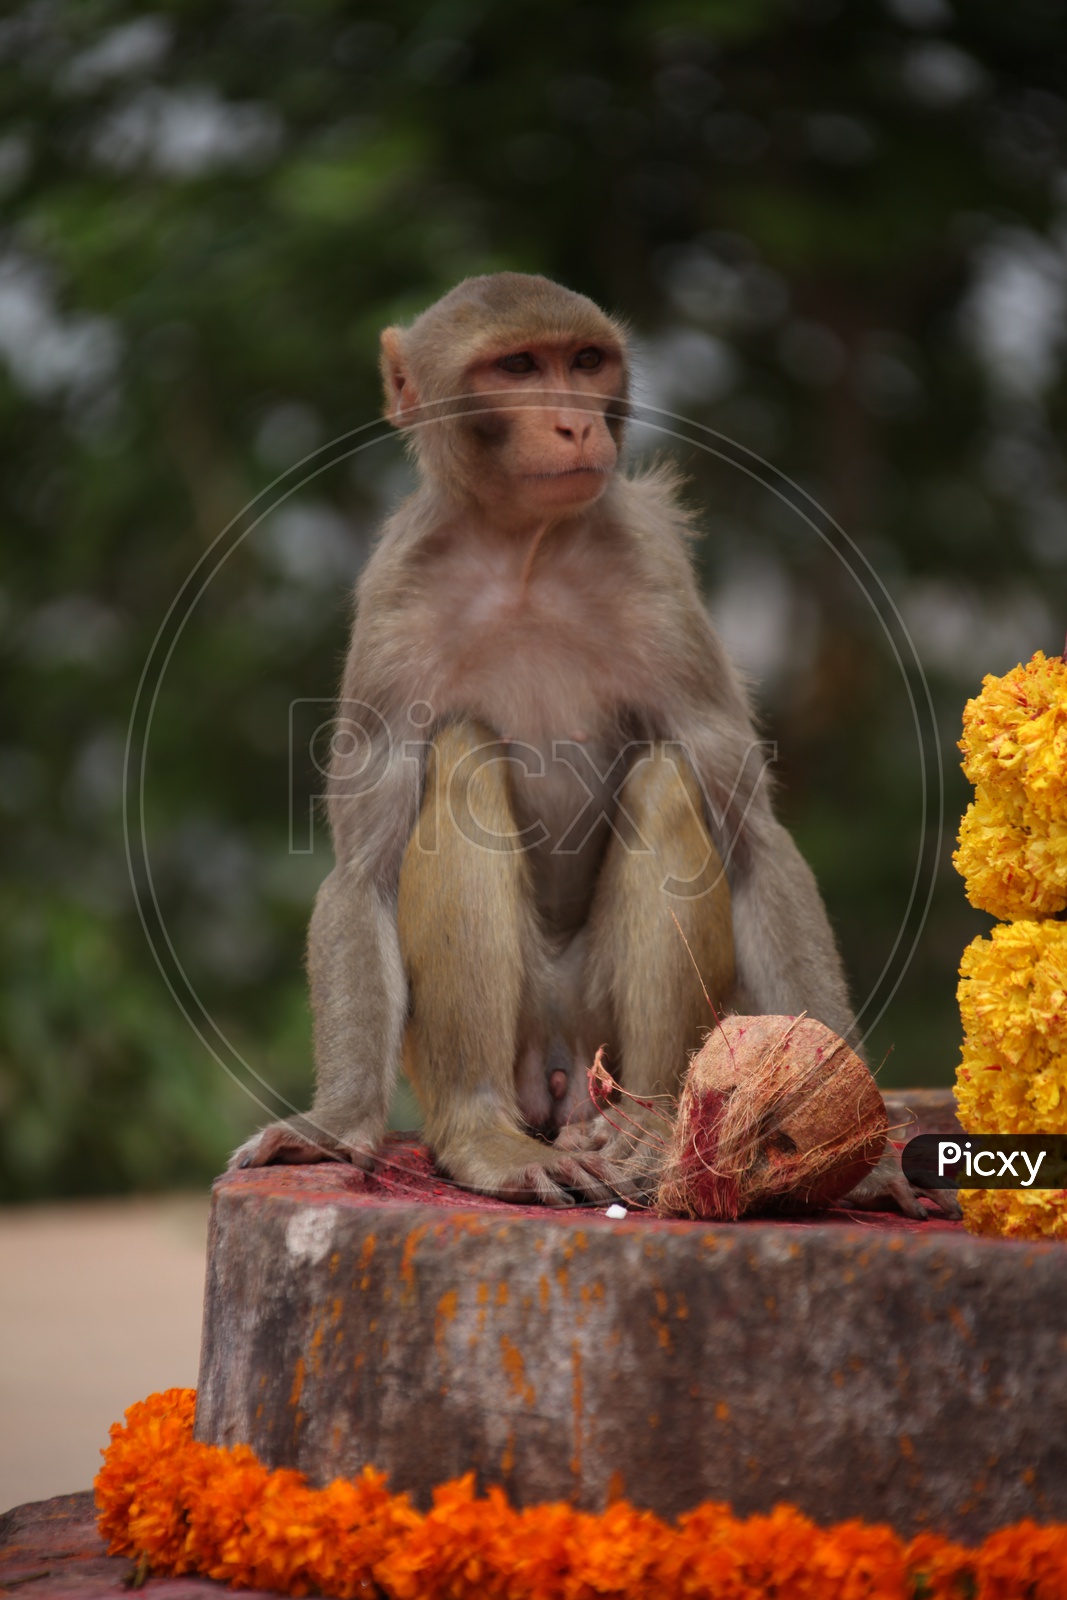 Macaque Or Monkey Sitting on a Stone